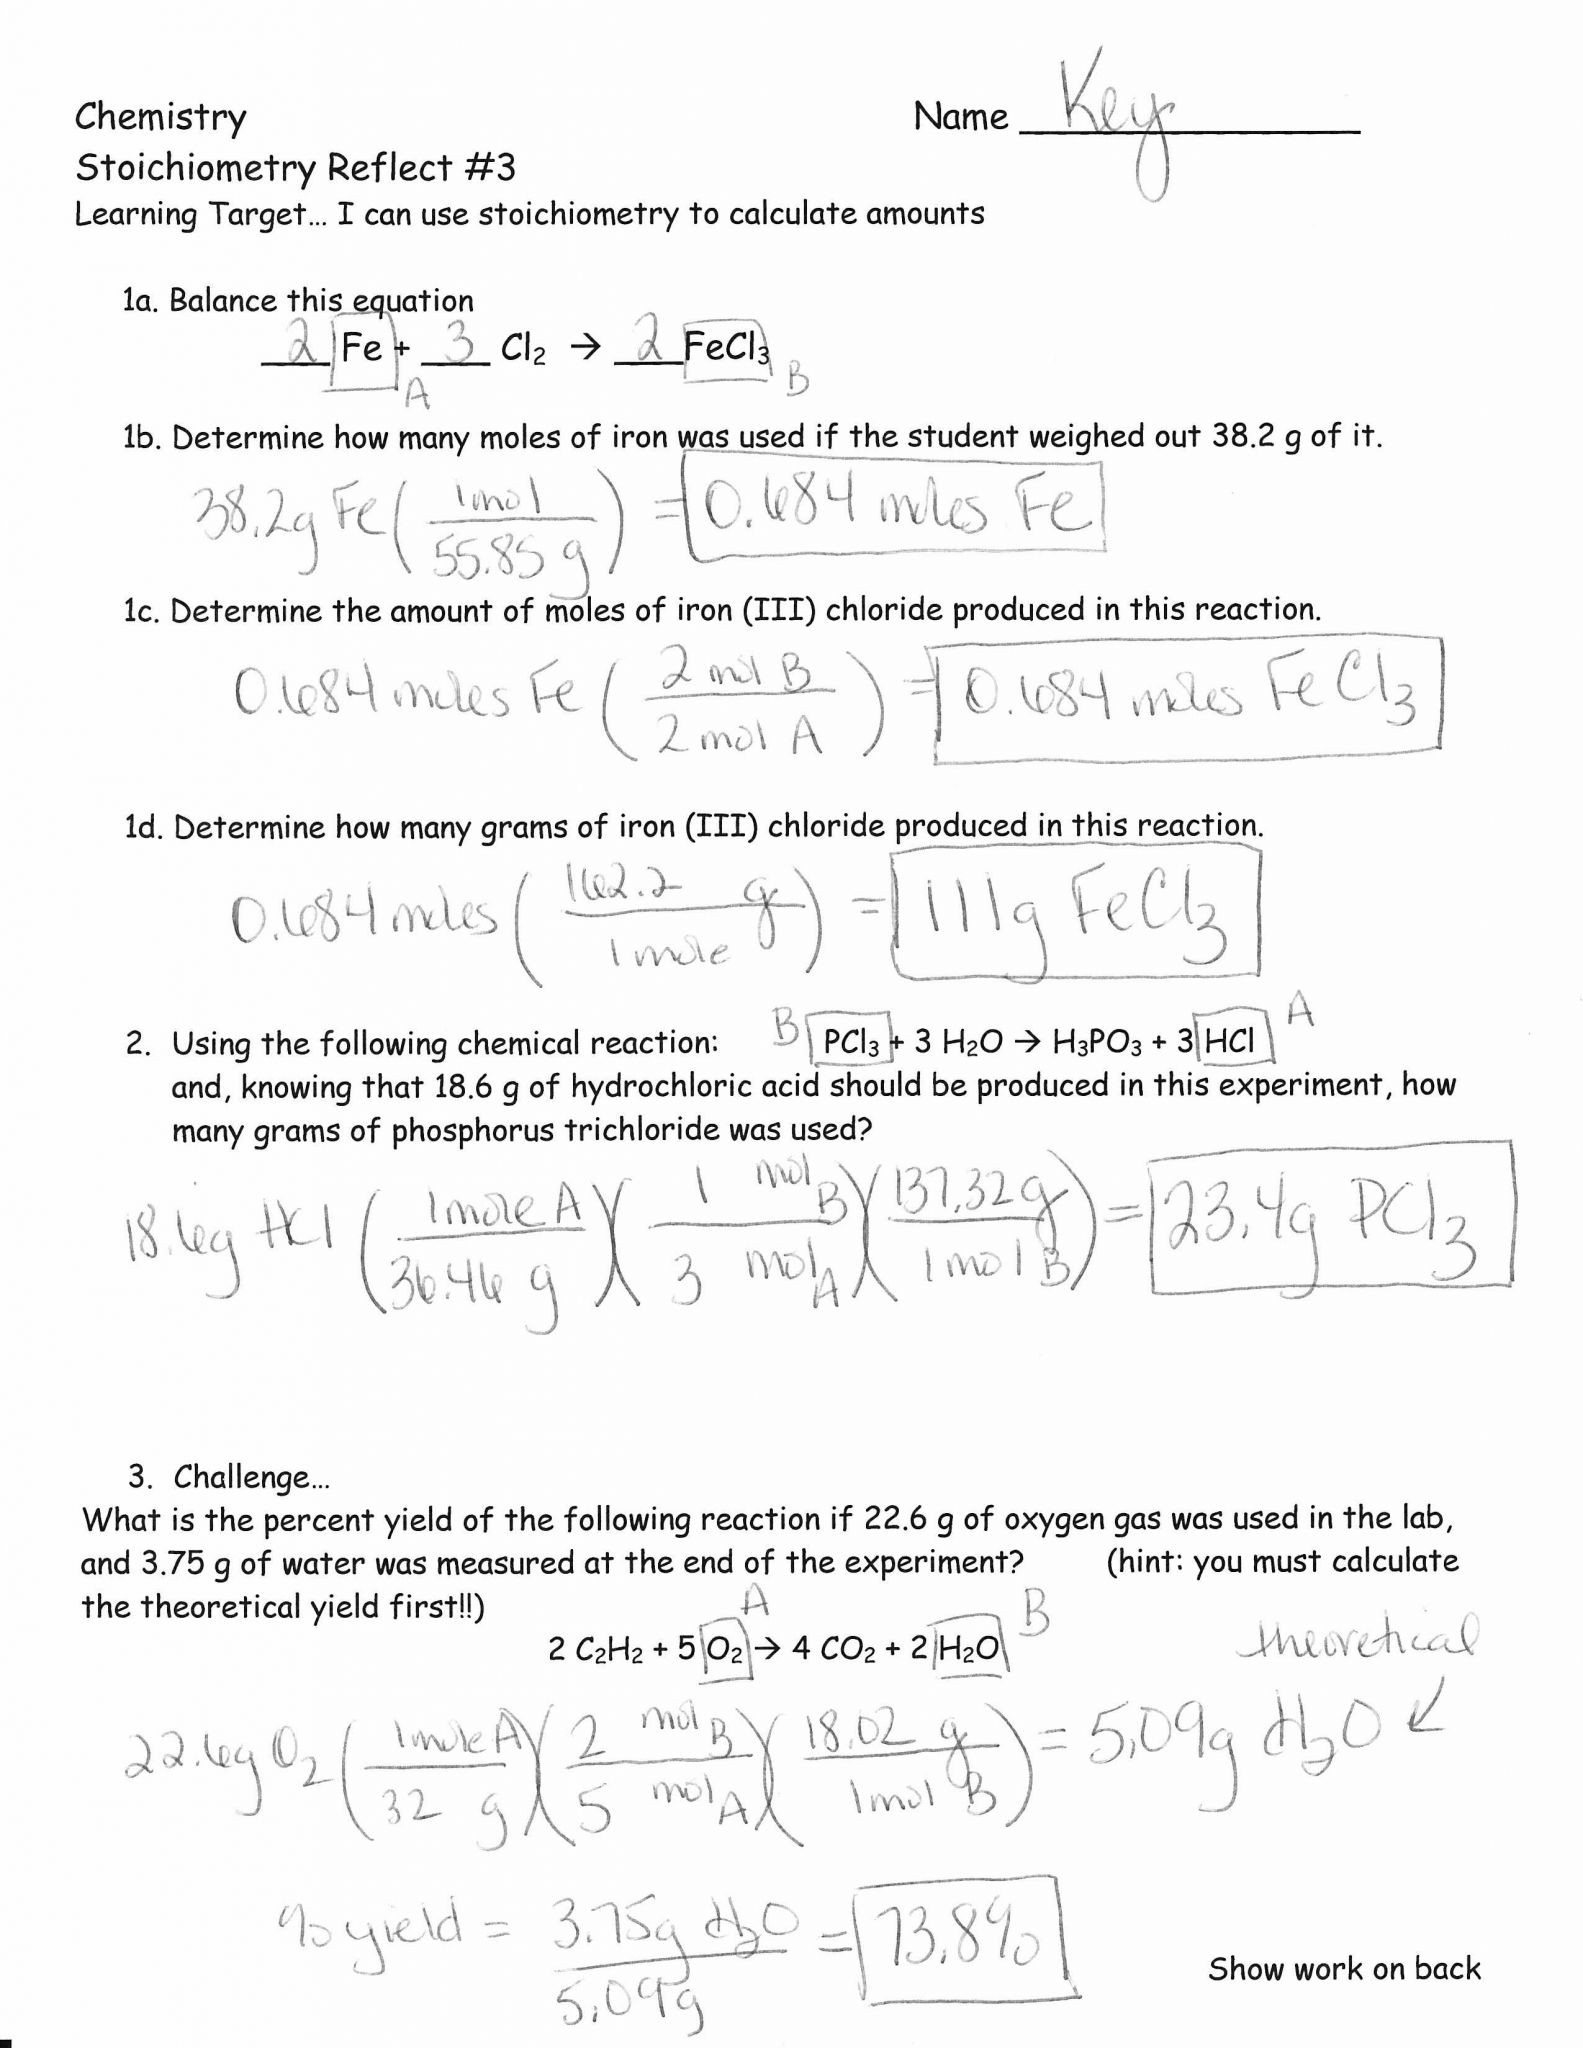 World War 2 Worksheets with Answers as Well as theoretical and Percent Yield Worksheet Answers & ""sc" 1"st" "